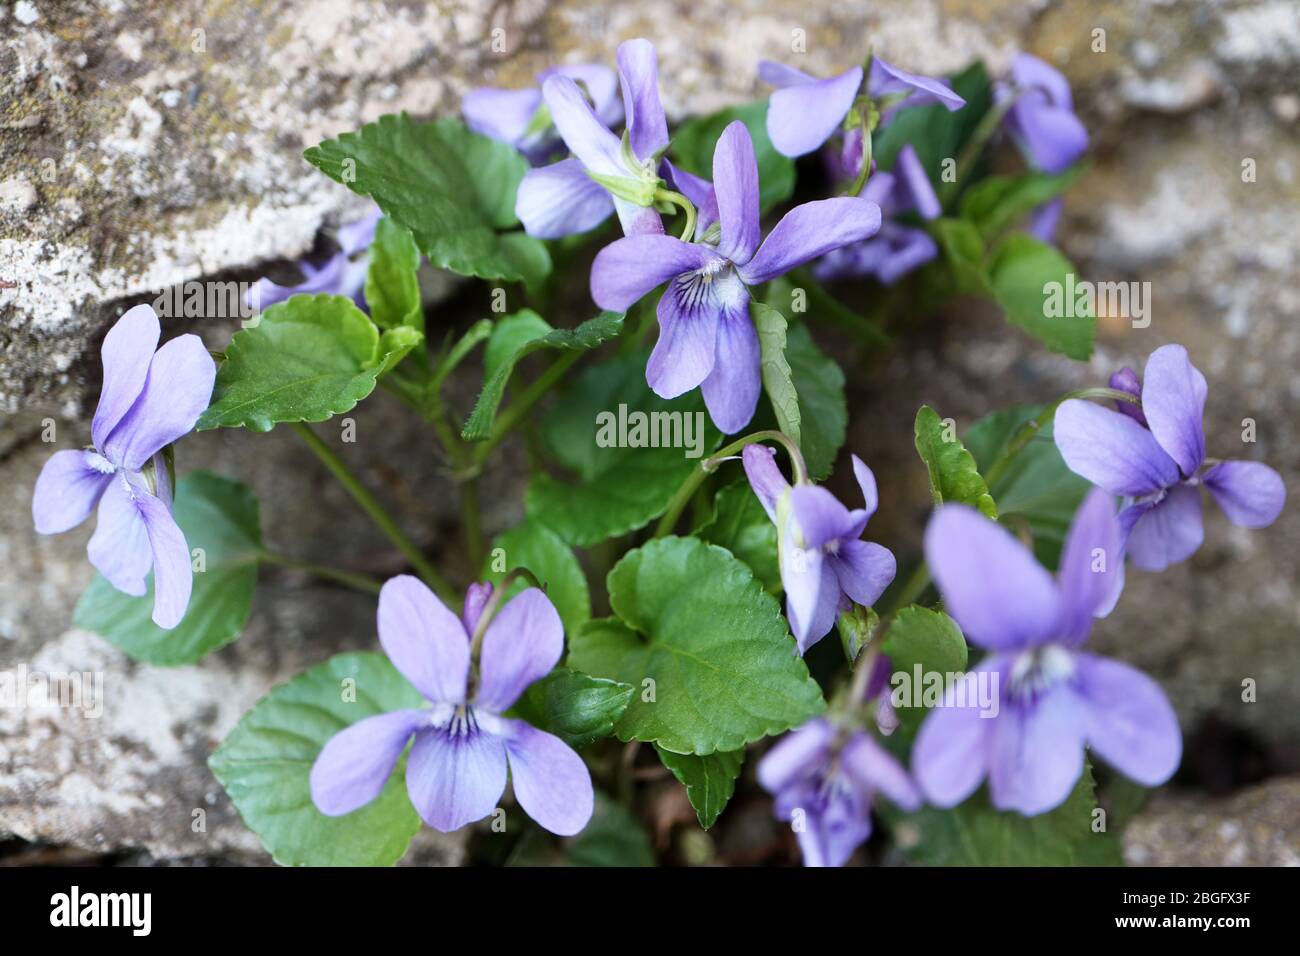 Wild purple violets in the garden,spring violets with delicate petals and green leaves,purple violets with stone wall background,macro,floral photo,ma Stock Photo